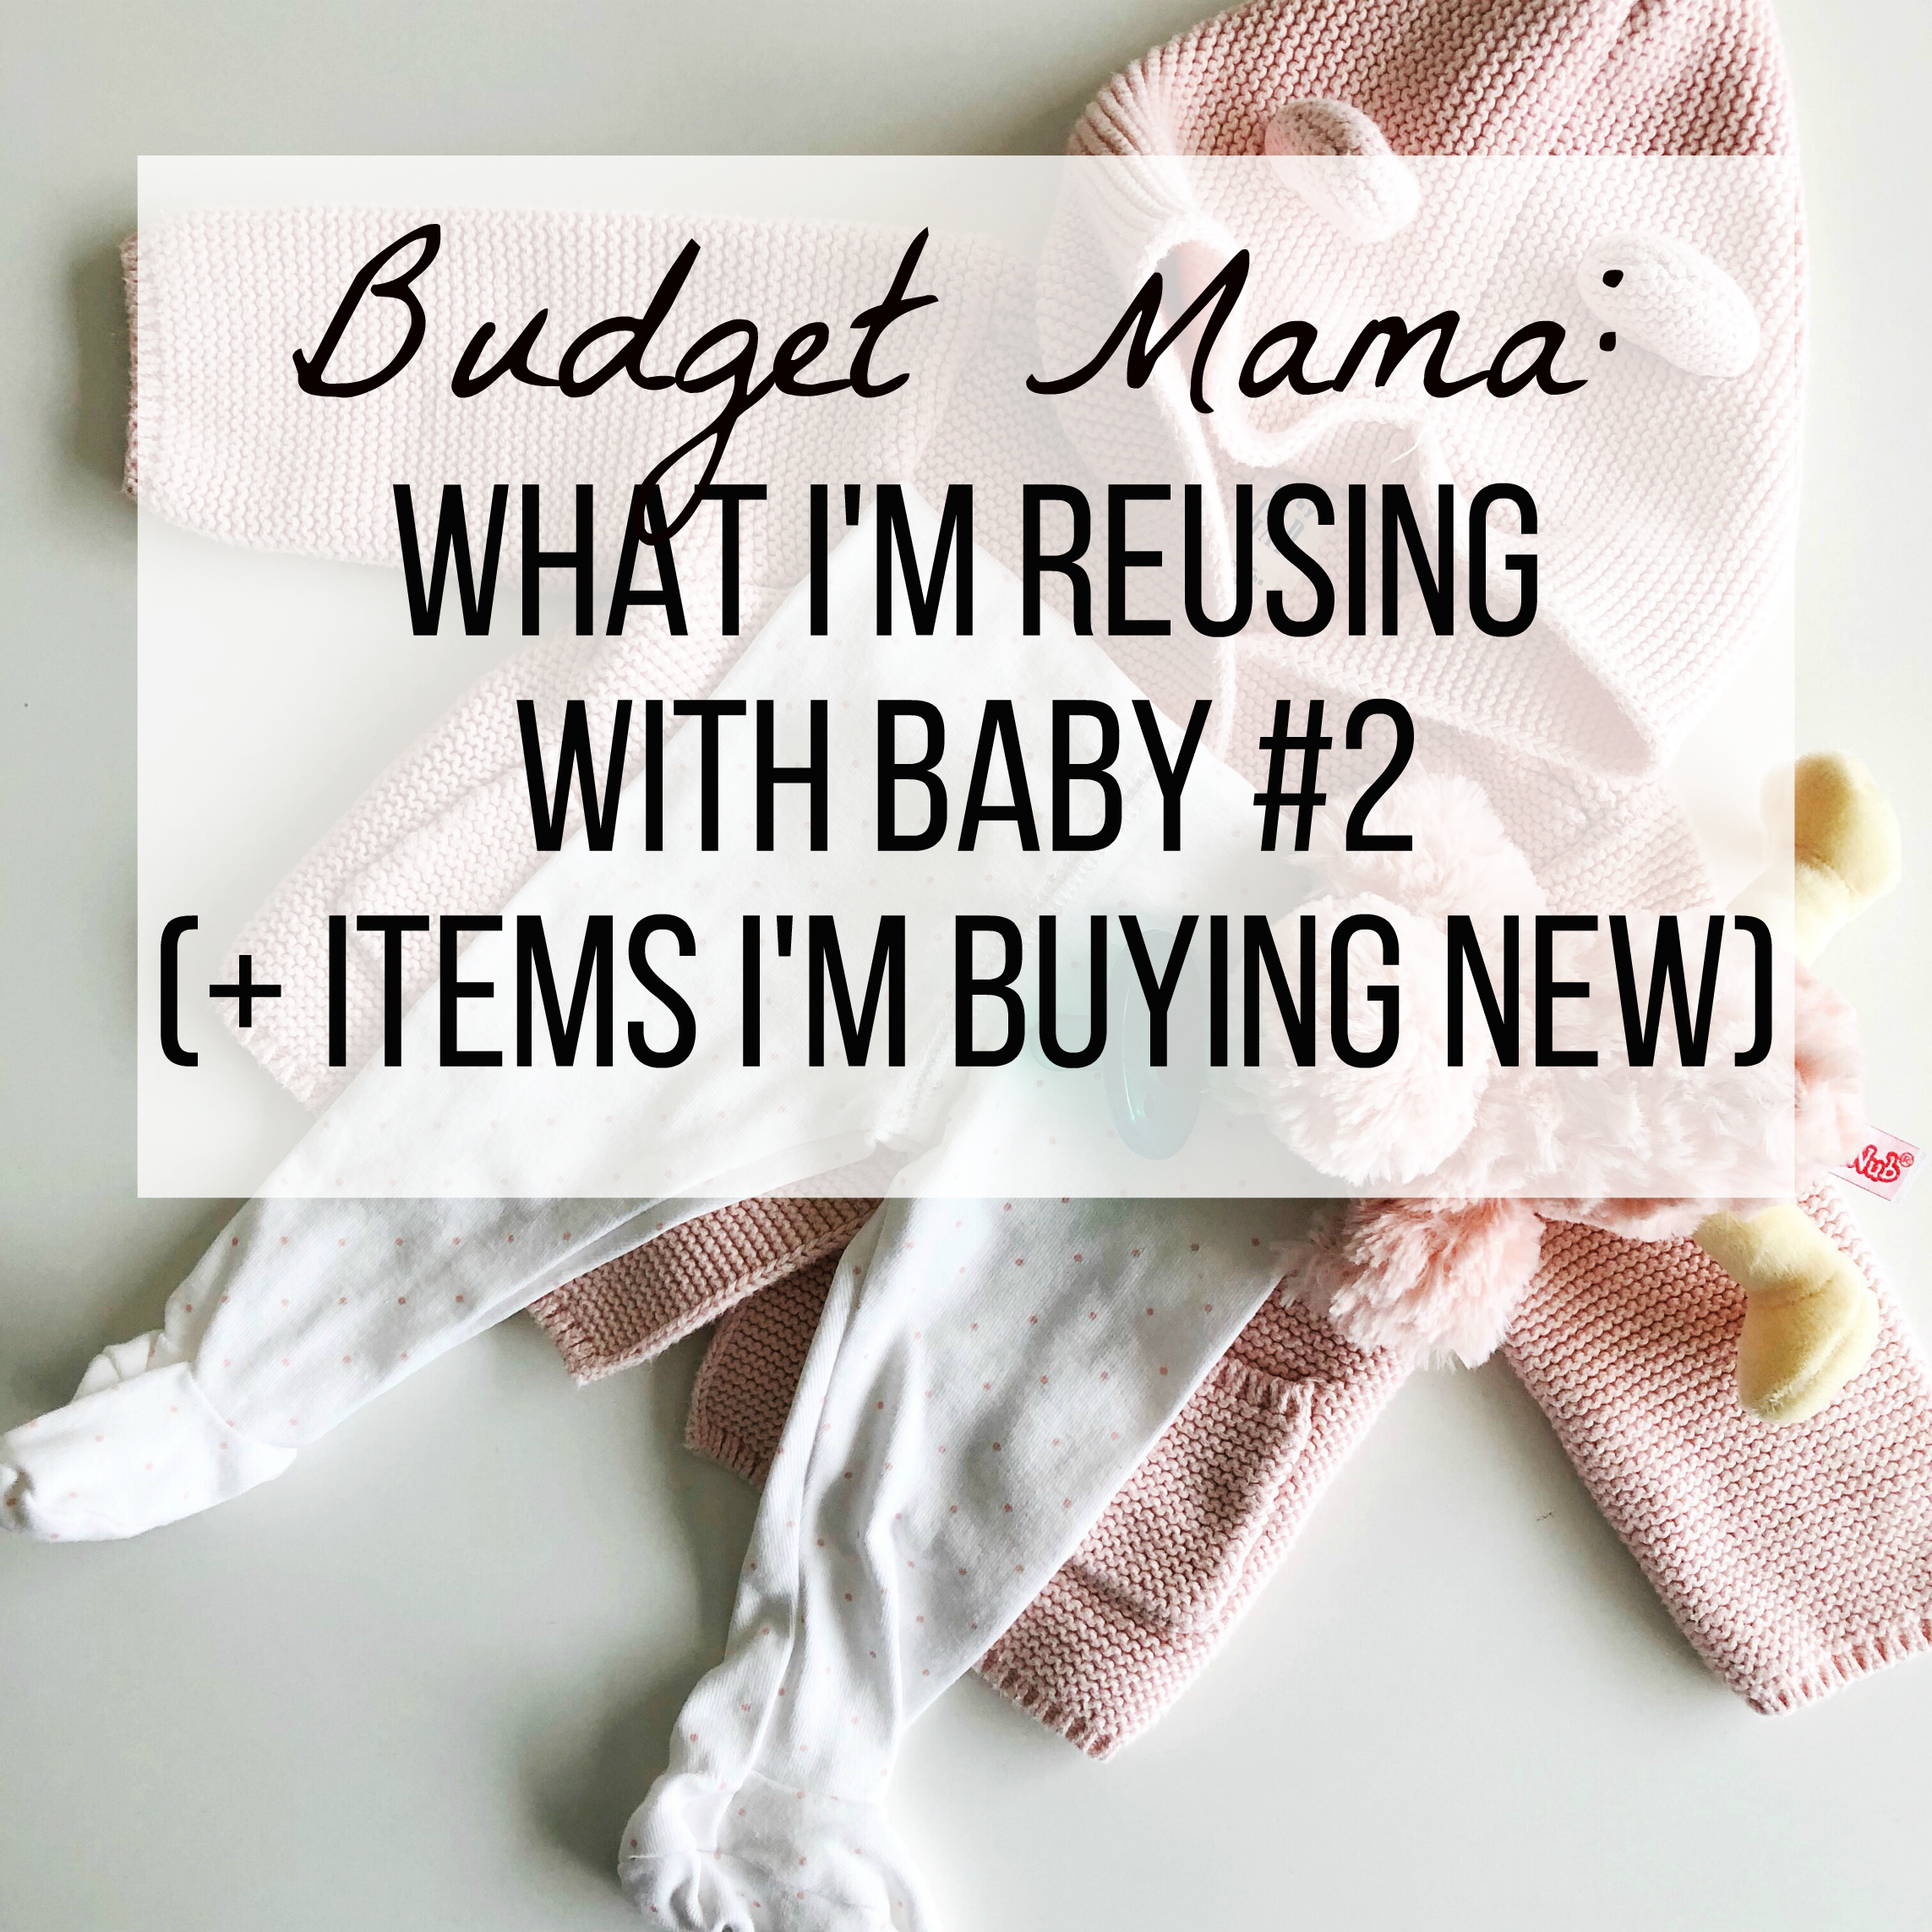 Budget Mama: What I'm Reusing with Baby #2 (+ Items I'm Buying New)